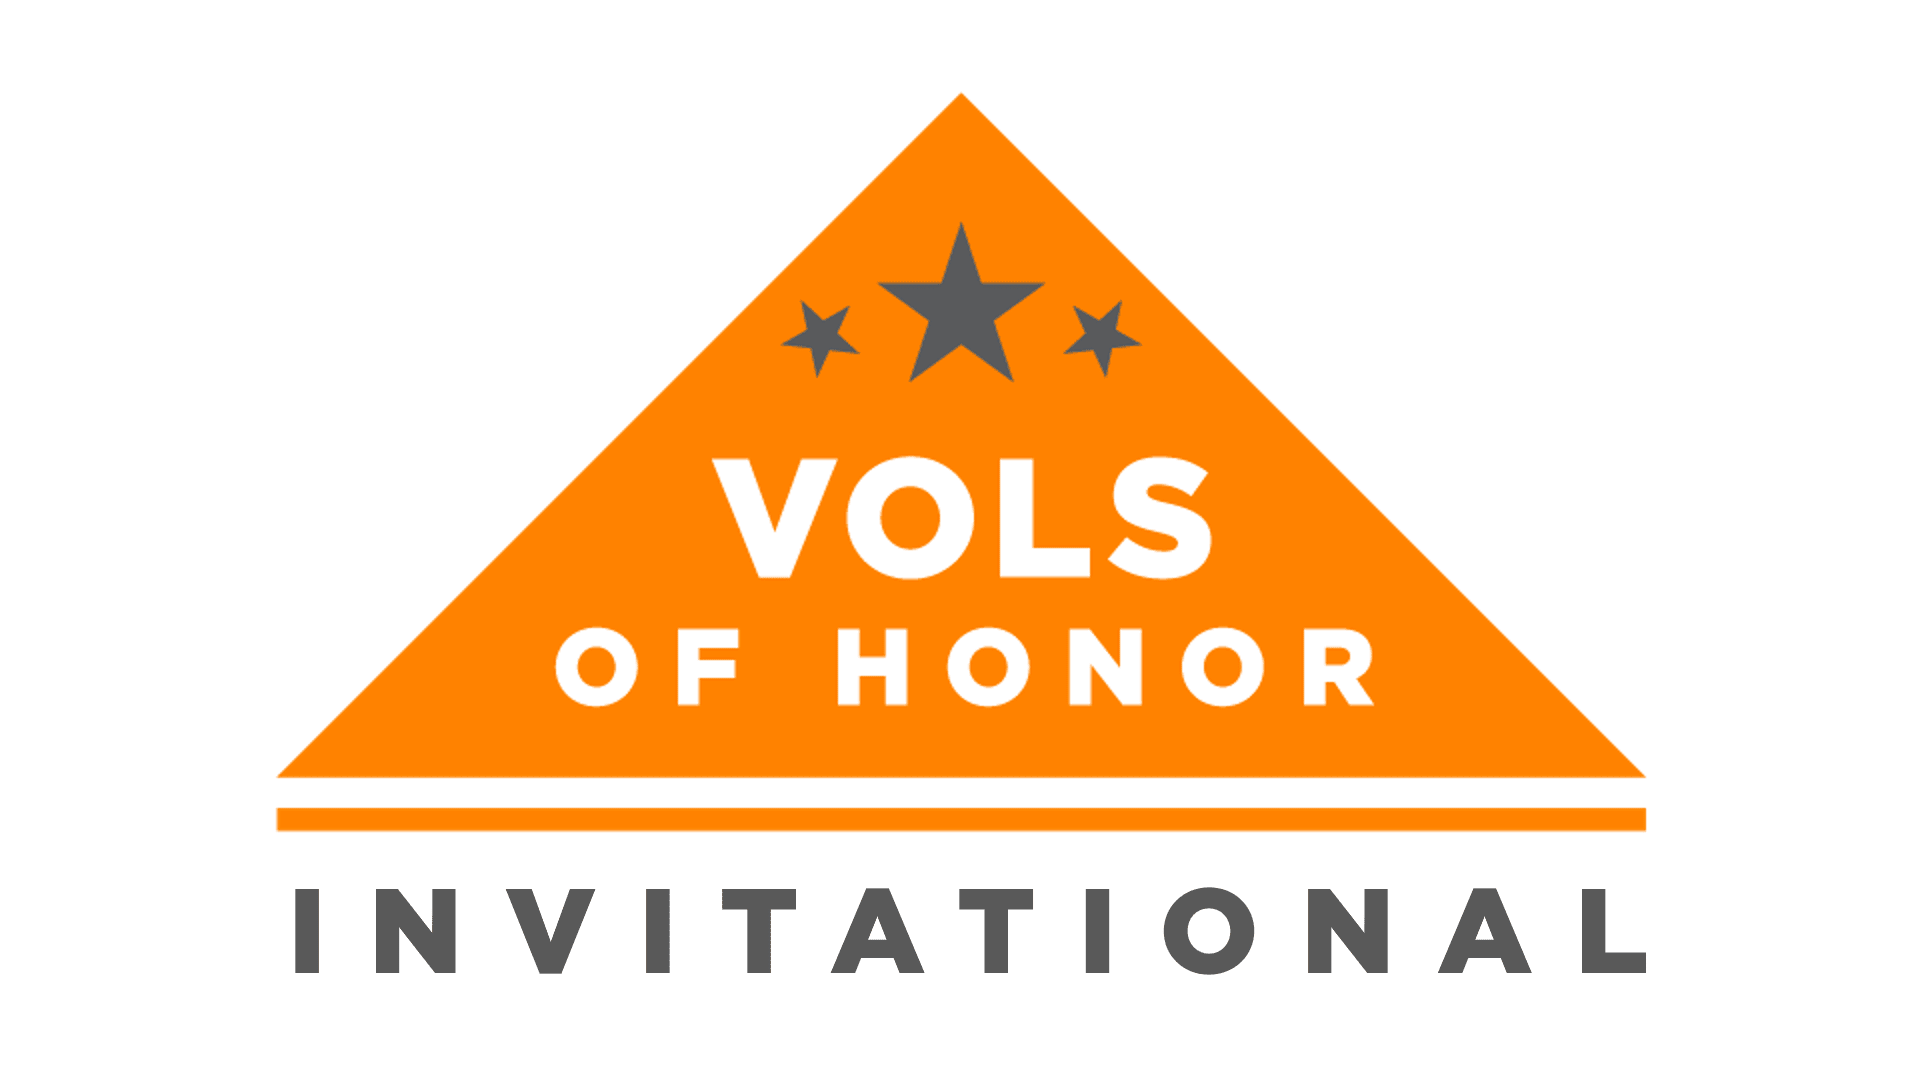 The Second annual Vols of Honor Invitational is fast approaching